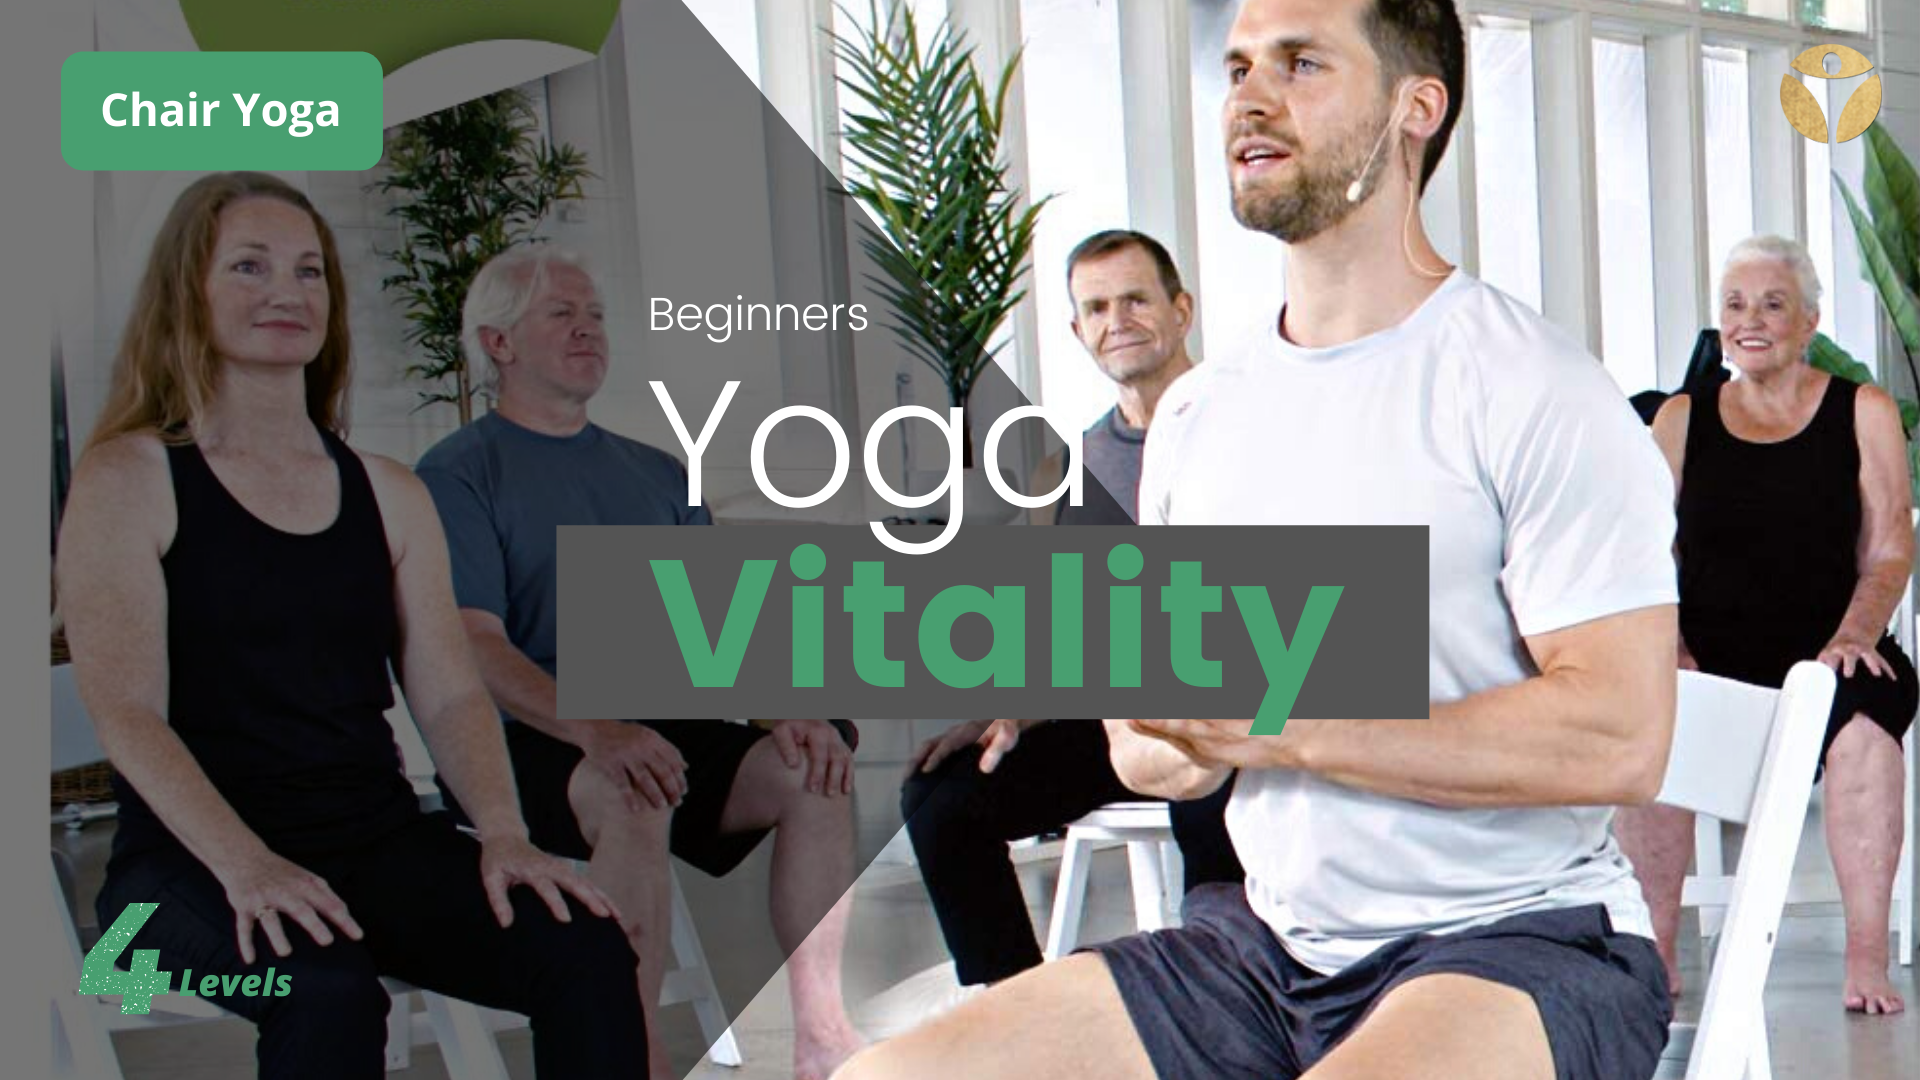 Yoga Vitality - Chair Yoga For Healthy Aging For Improved Mobility, Joint  Health, Balance, Pain Relief, and Injury Prevention, Made For Absolute  Beginners, Older Adults, and Seniors